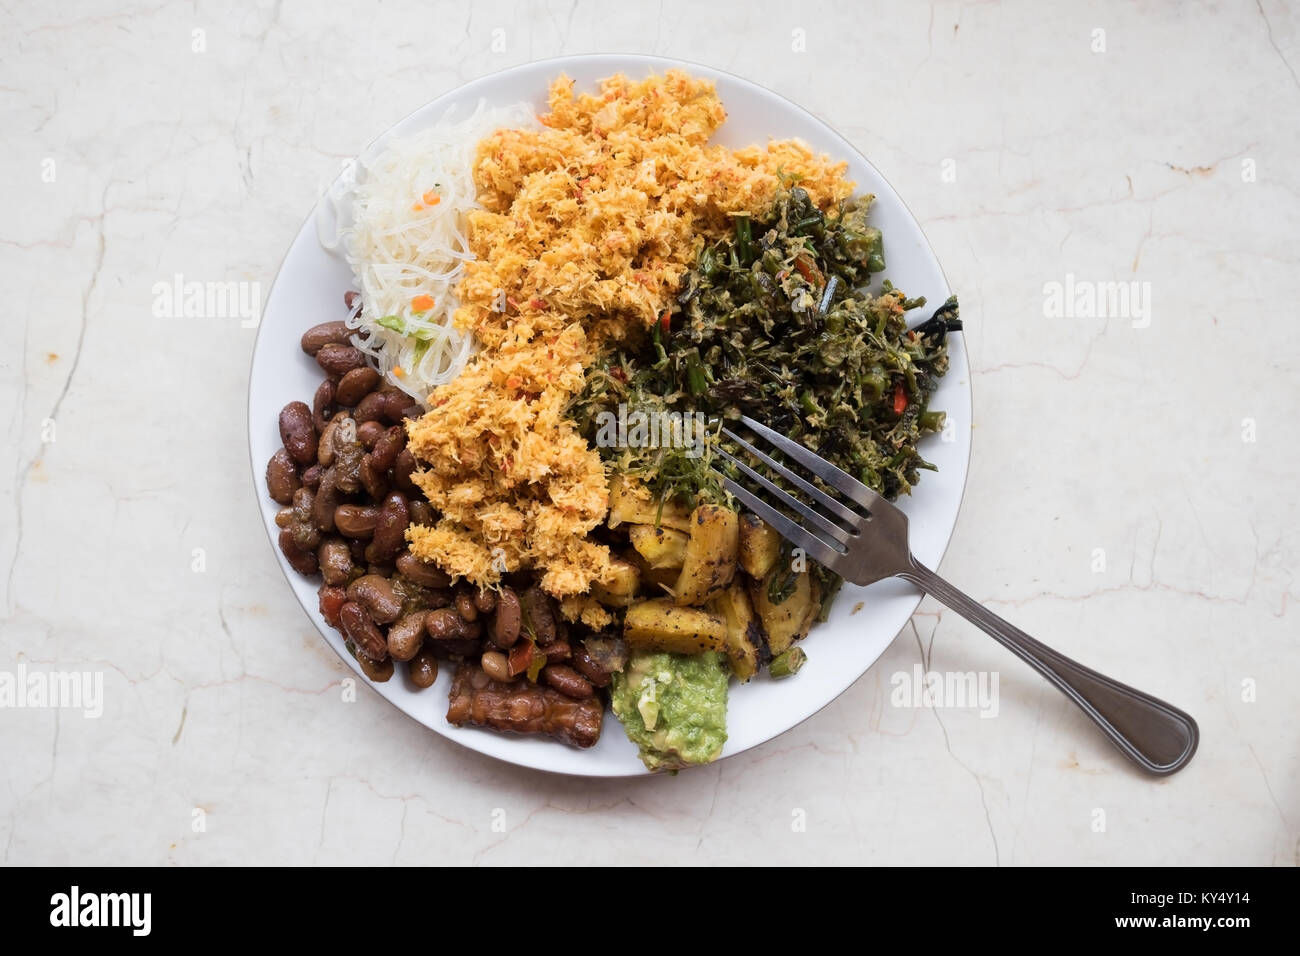 Plate with vegan meal in Bali caffee. Stock Photo